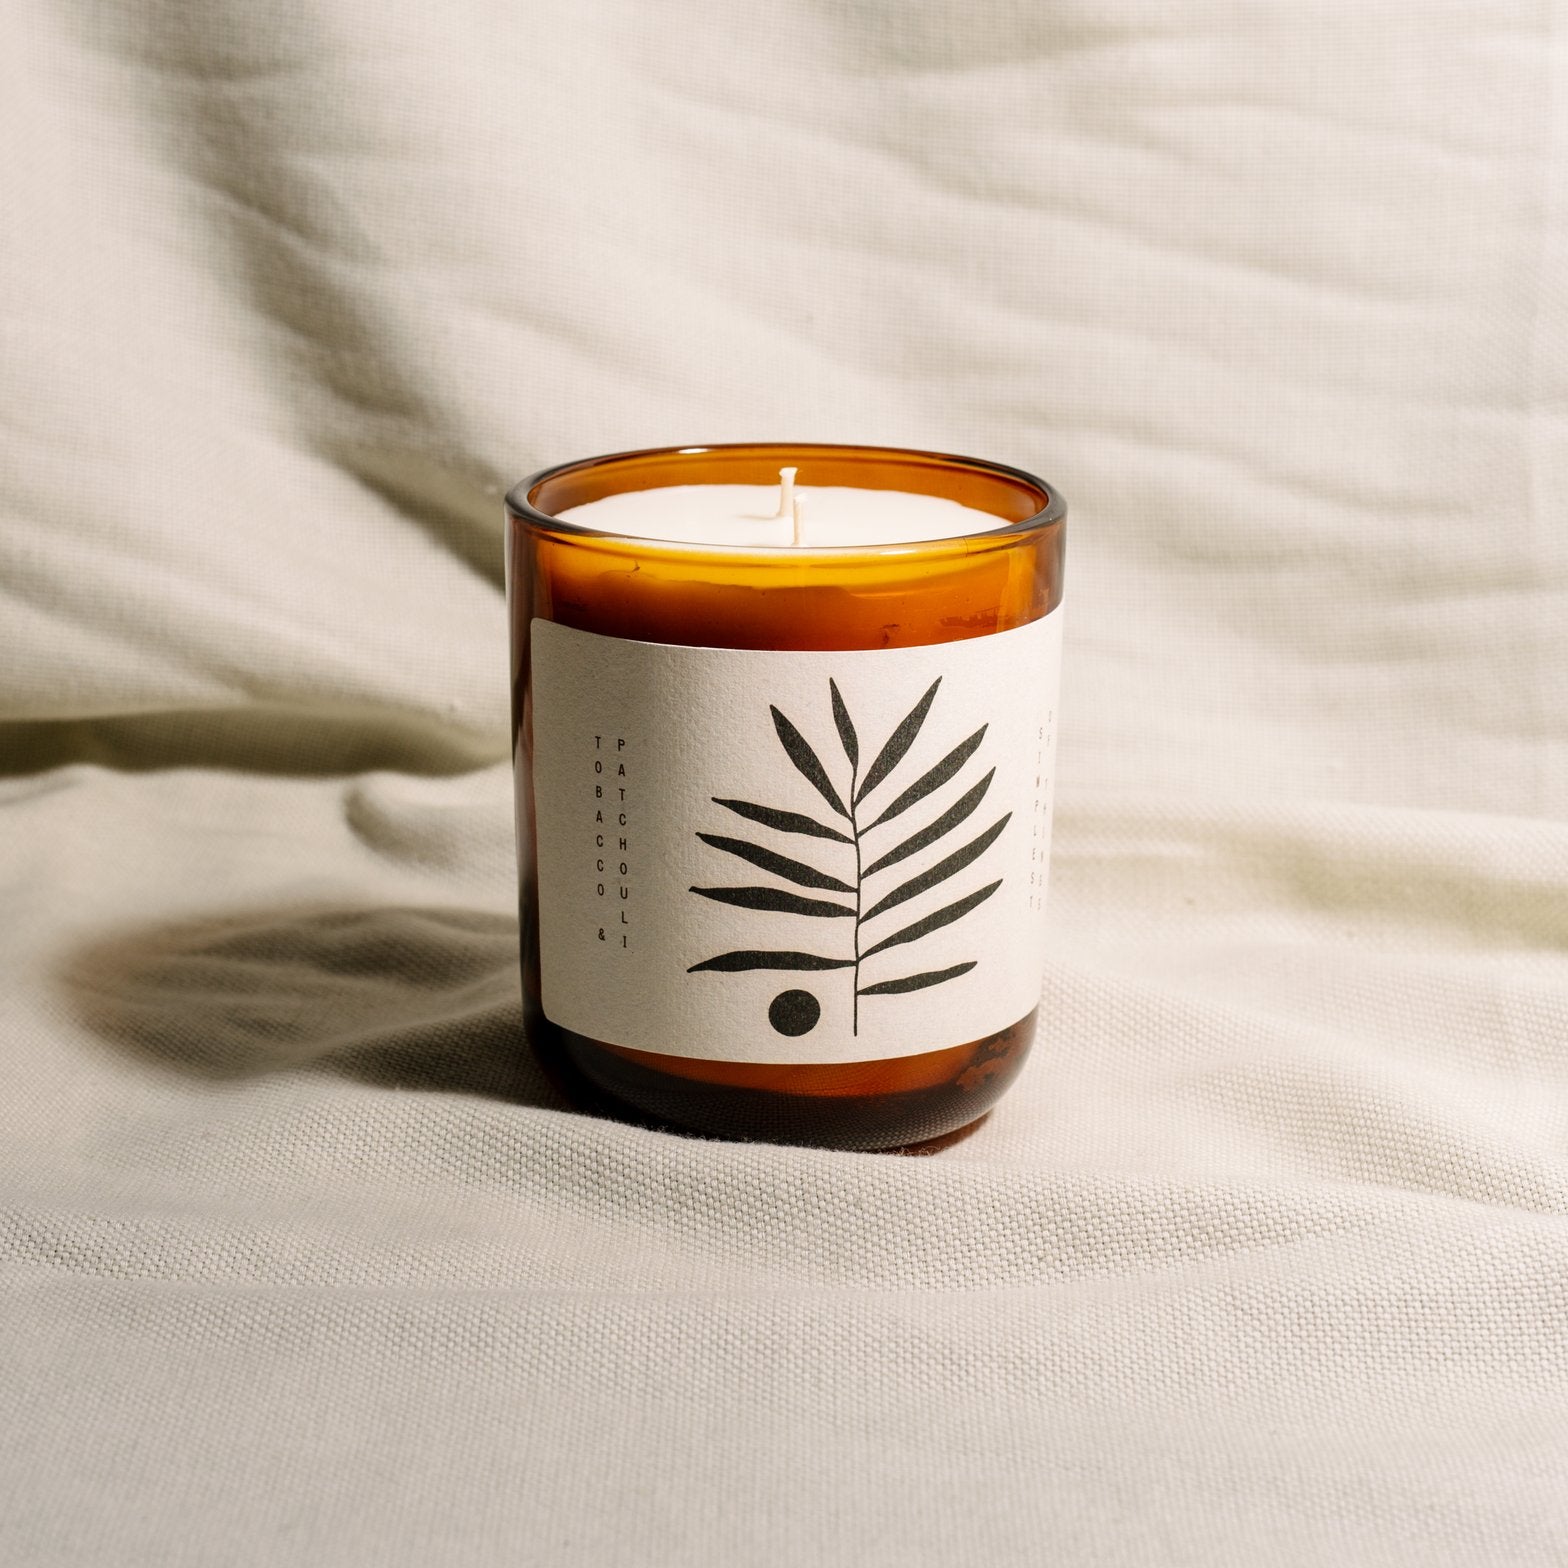 Simplest of Things Soy Candle in Tobacco & Patchouli